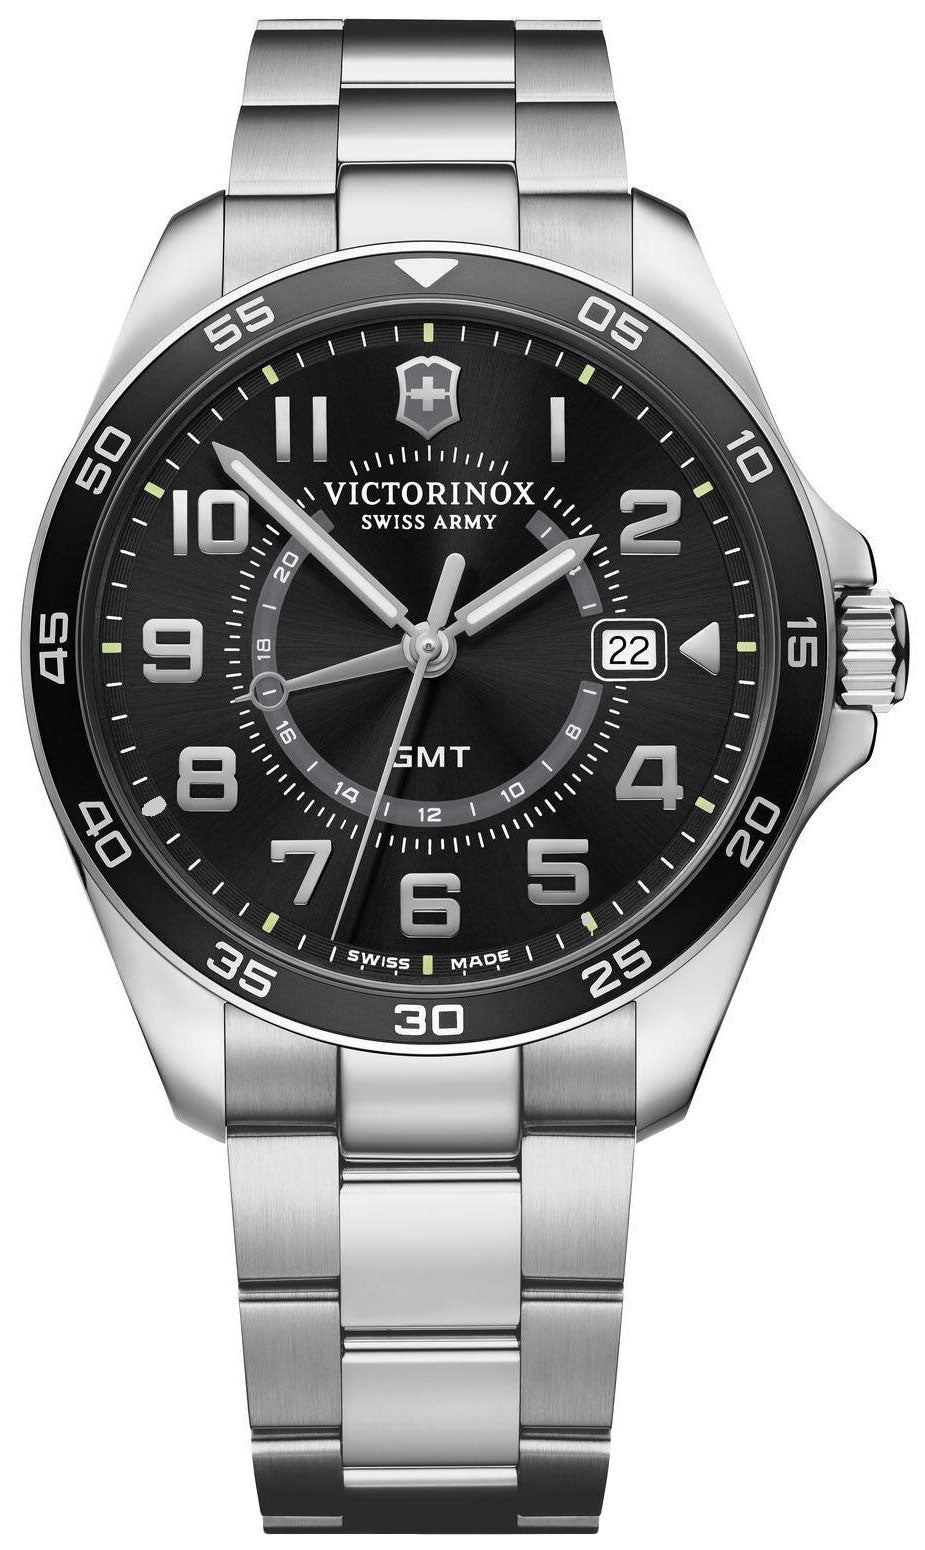 update alt-text with template Watches - Mens-Victorinox Swiss Army-241930-40 - 45 mm, black, date, FieldForce, GMT, mens, menswatches, new arrivals, round, rpSKU_241695, rpSKU_241798, rpSKU_241899, rpSKU_241931, rpSKU_FC-252DGS5B6B, stainless steel band, stainless steel case, swiss quartz, Victorinox Swiss Army, watches-Watches & Beyond